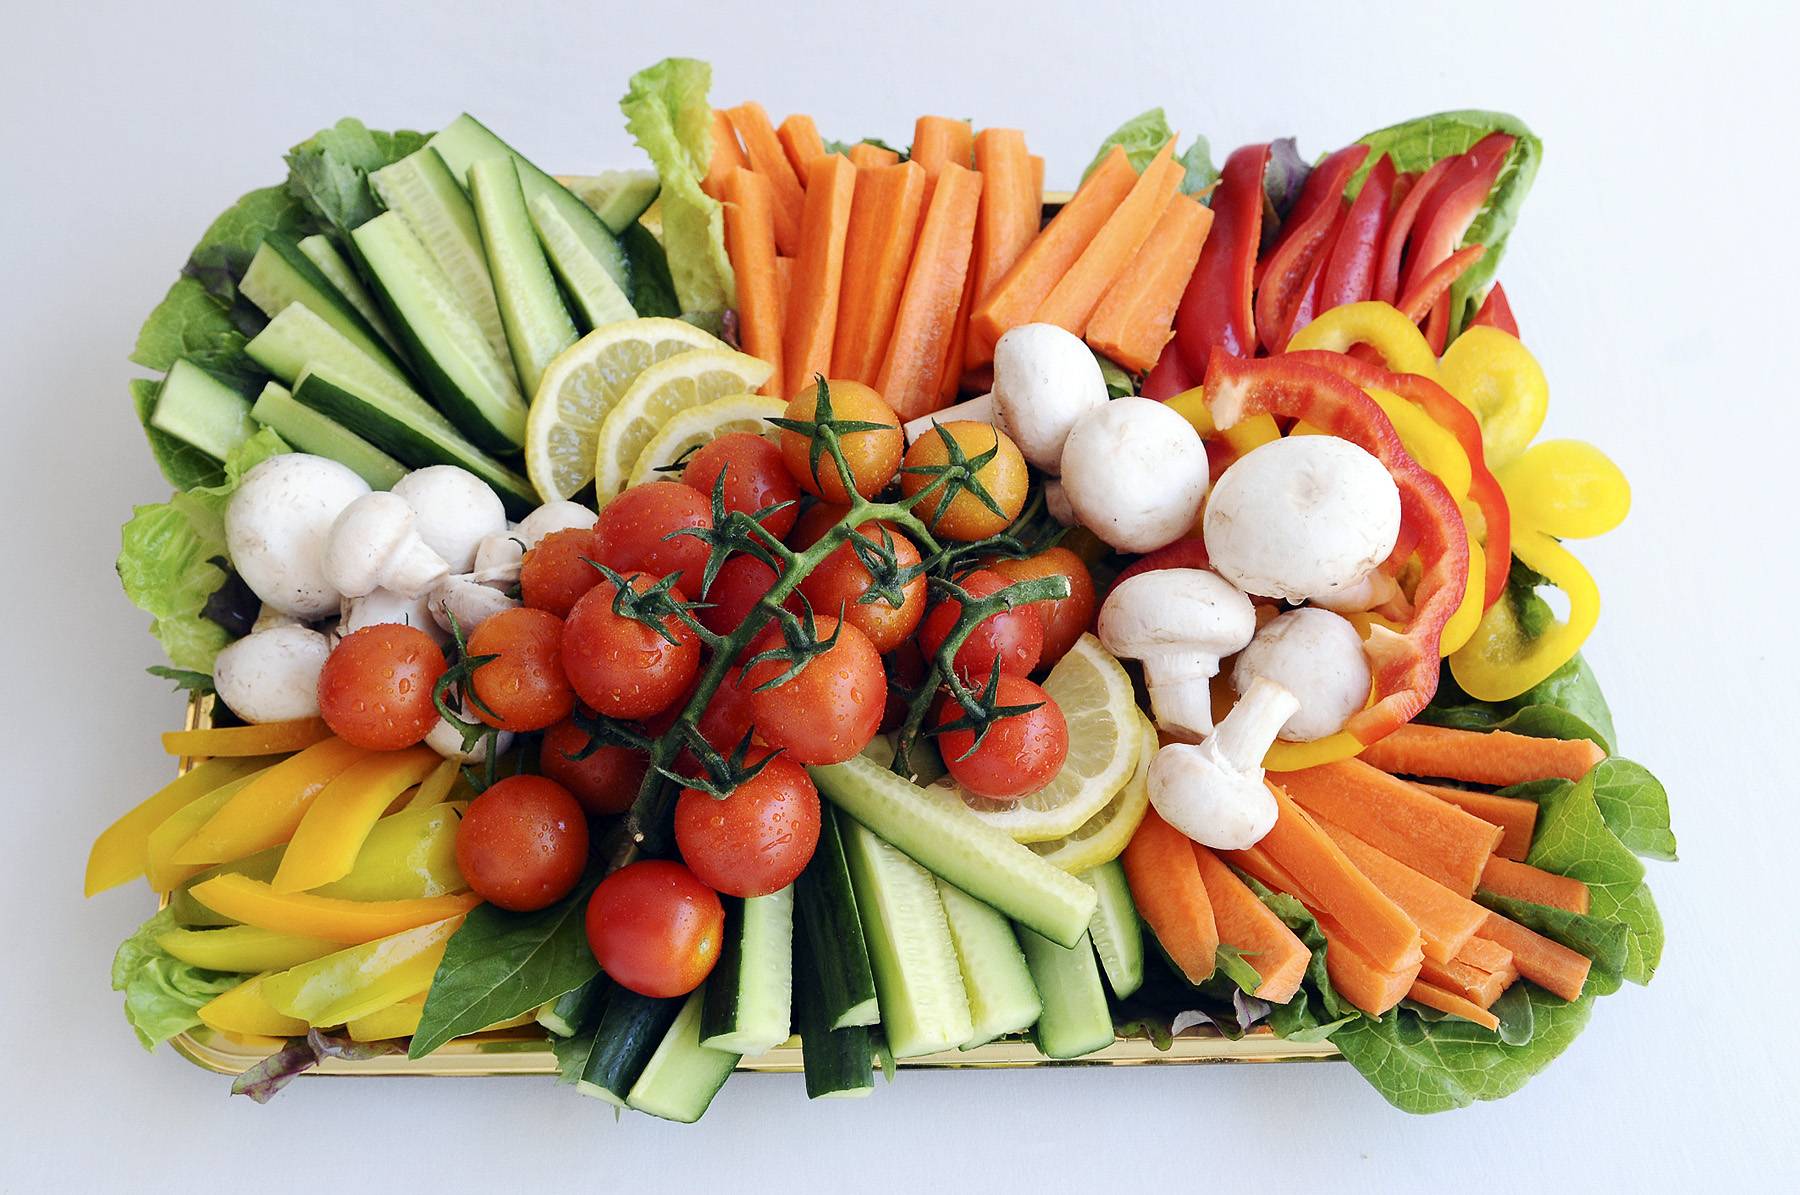 Bring Back-Up - If you’re going to someone else’s house for a holiday meal, Andrus suggests bringing a raw veggie plate to ensure there is something healthy to eat before digging into any holiday treats.(Photo: Getty Images)